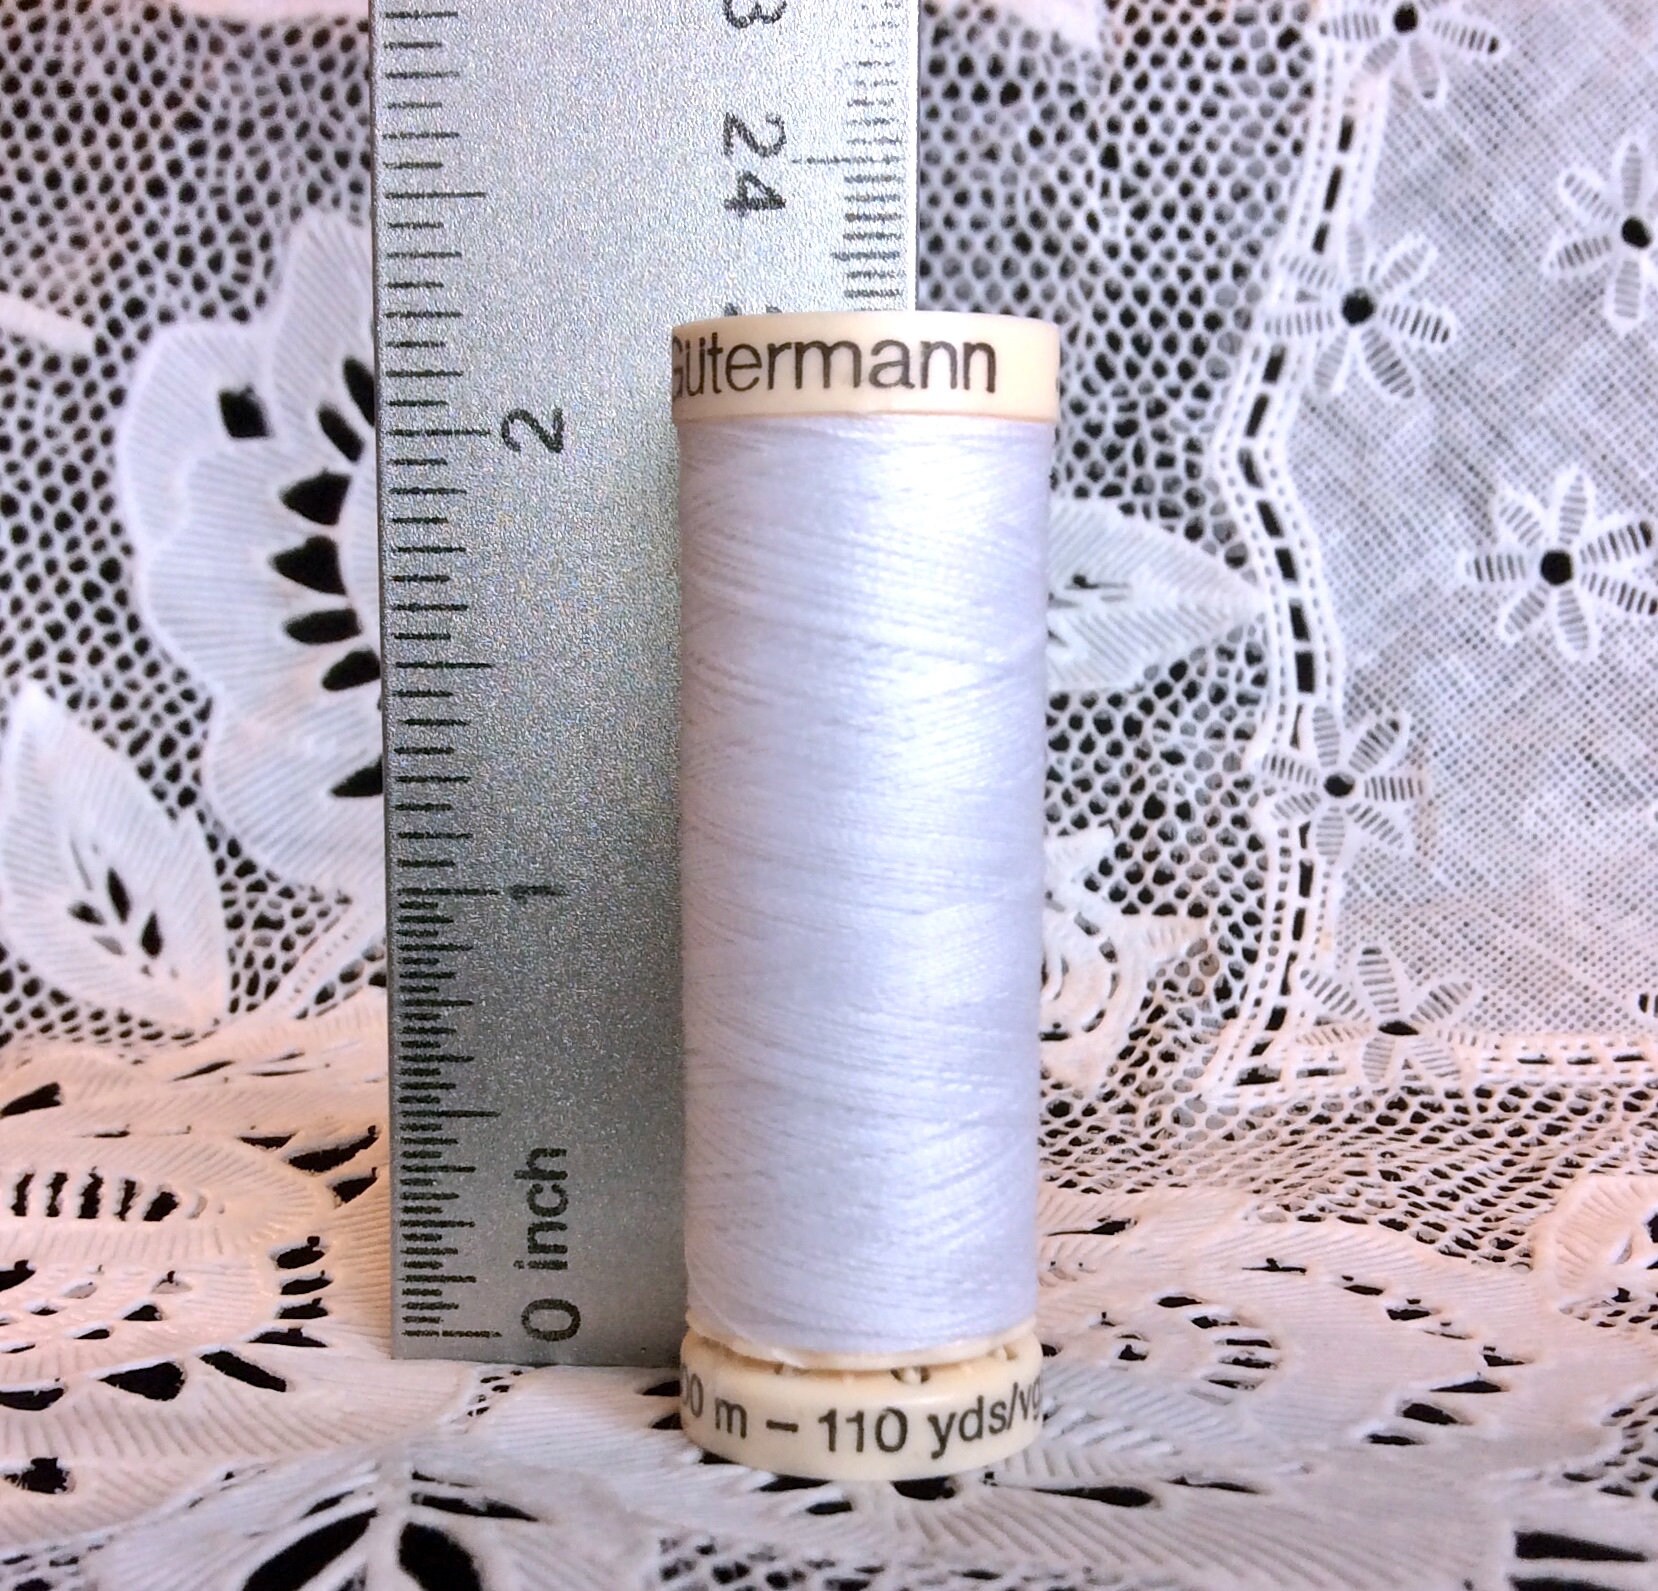 6 NEW different colors GUTERMANN 100% polyester thread 110 yard spools